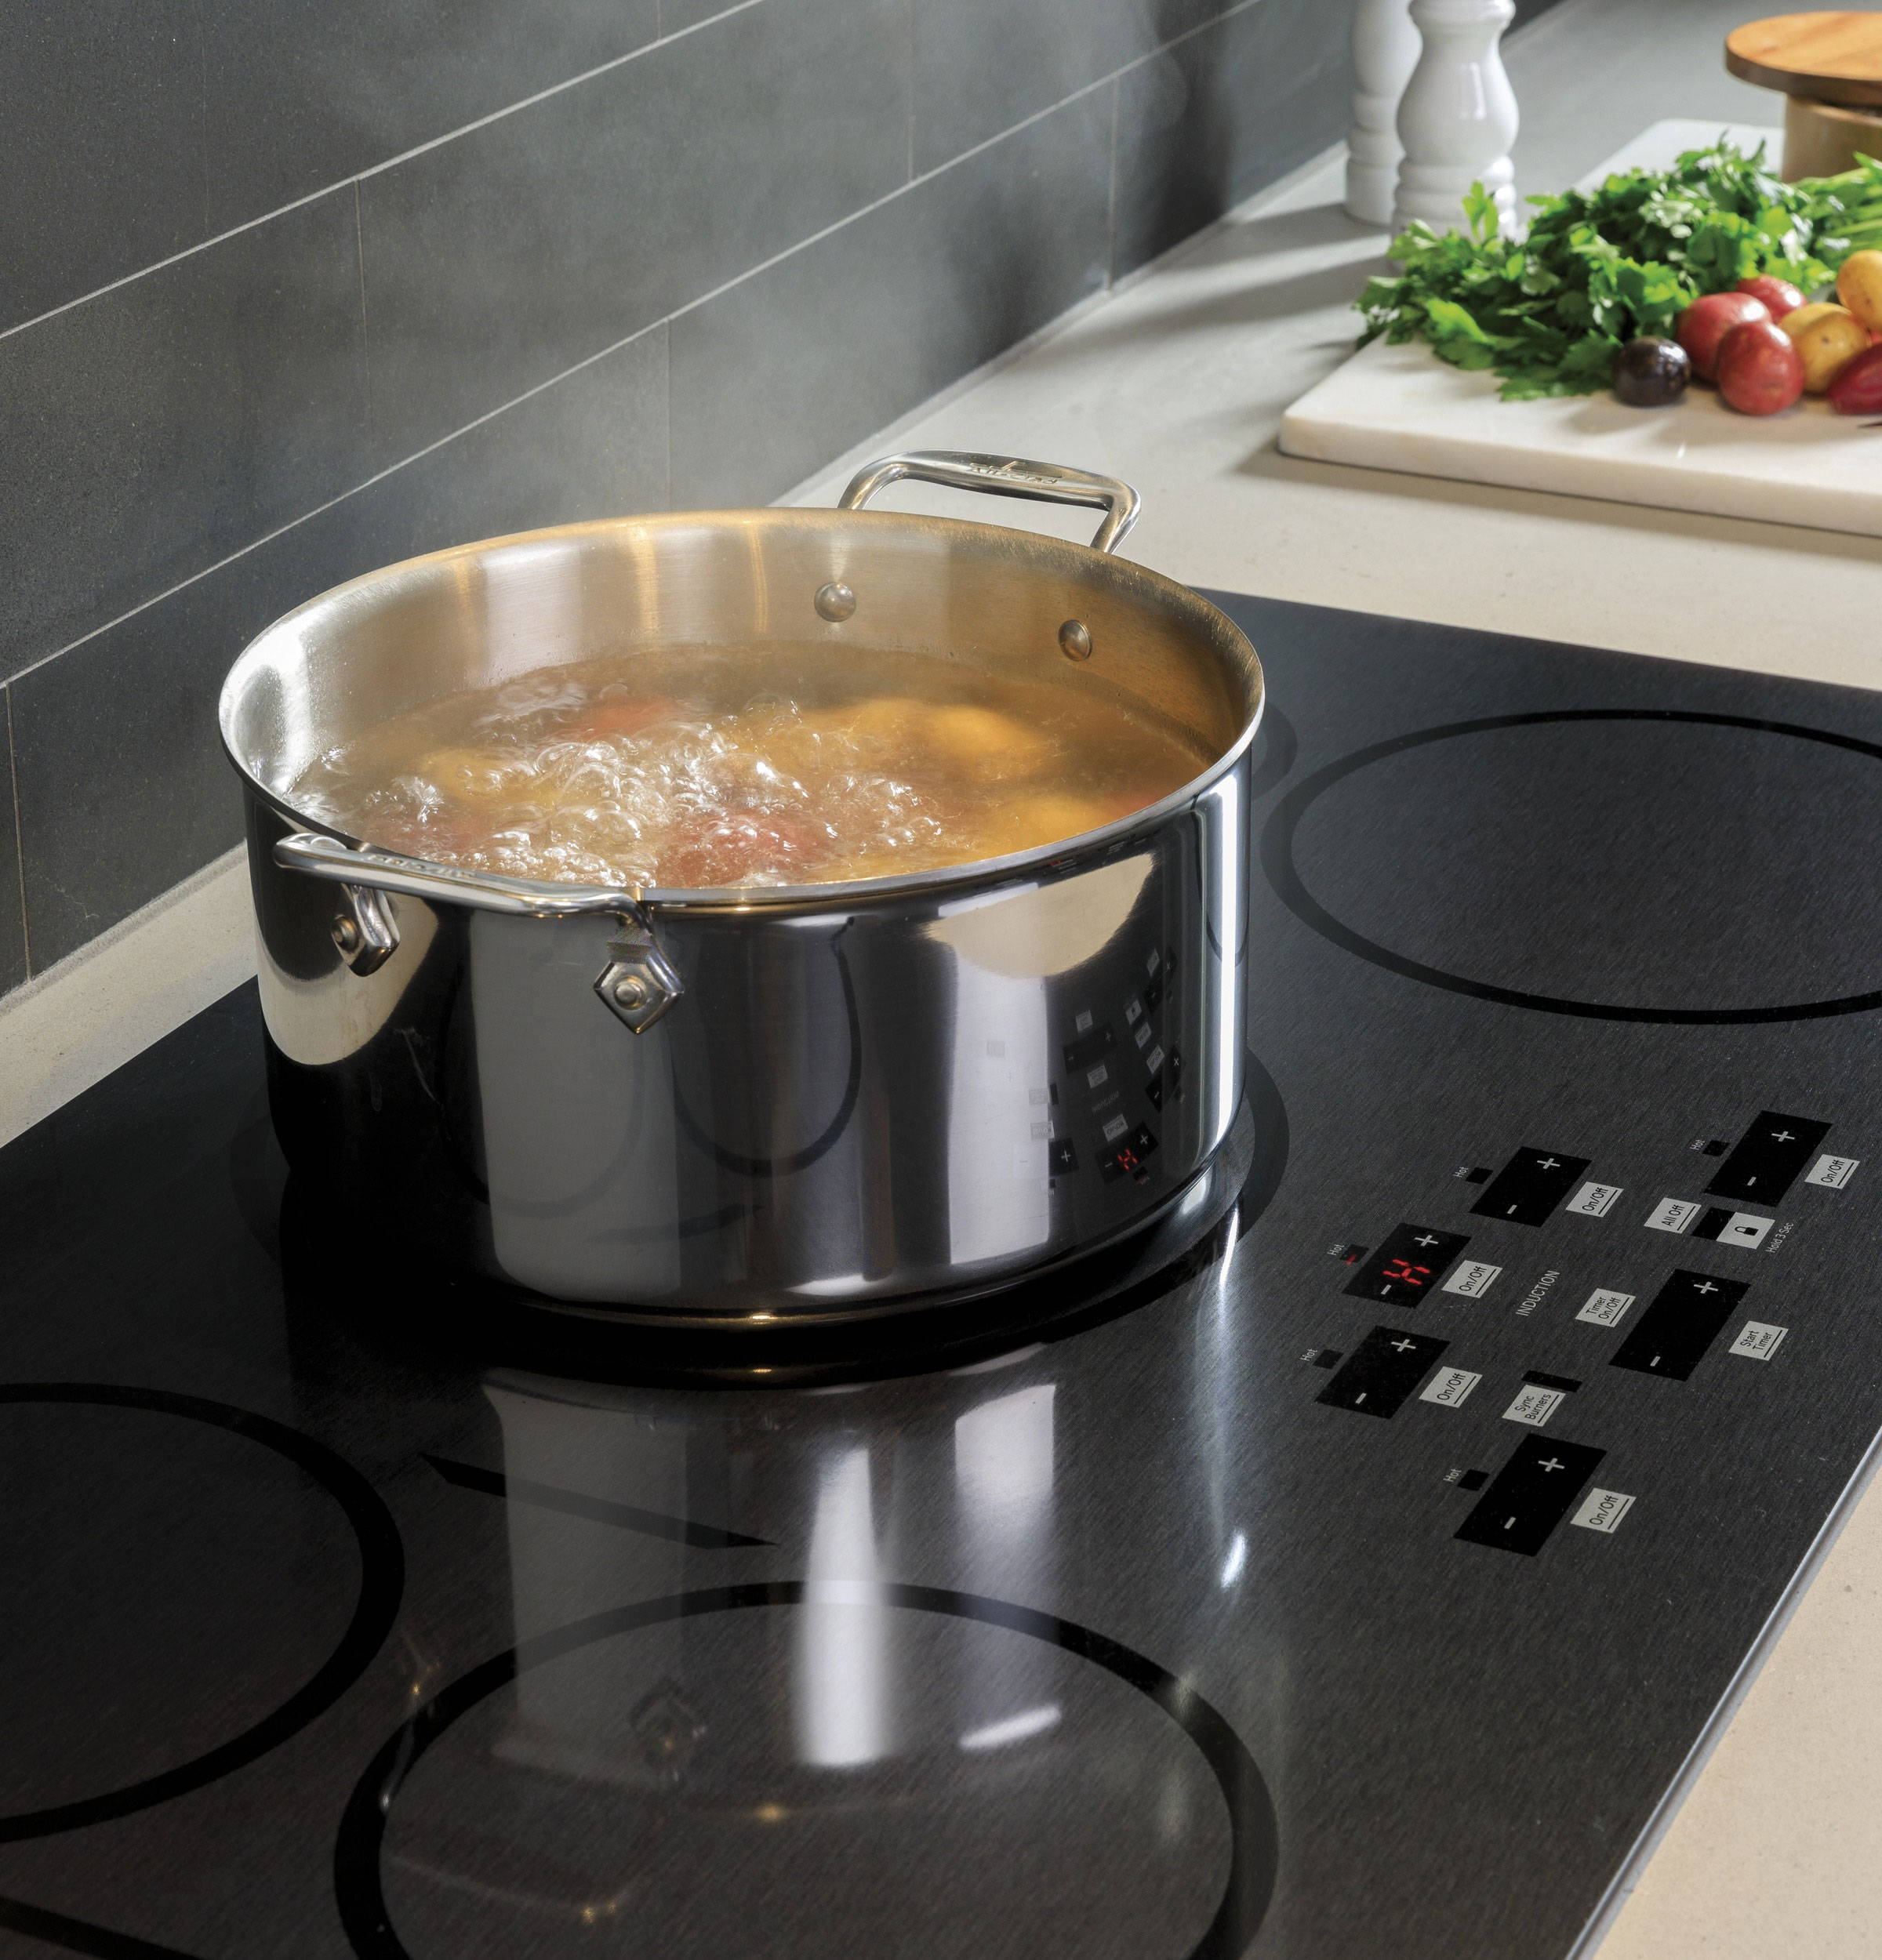 GE Profile induction cooktops feature speedier cooking